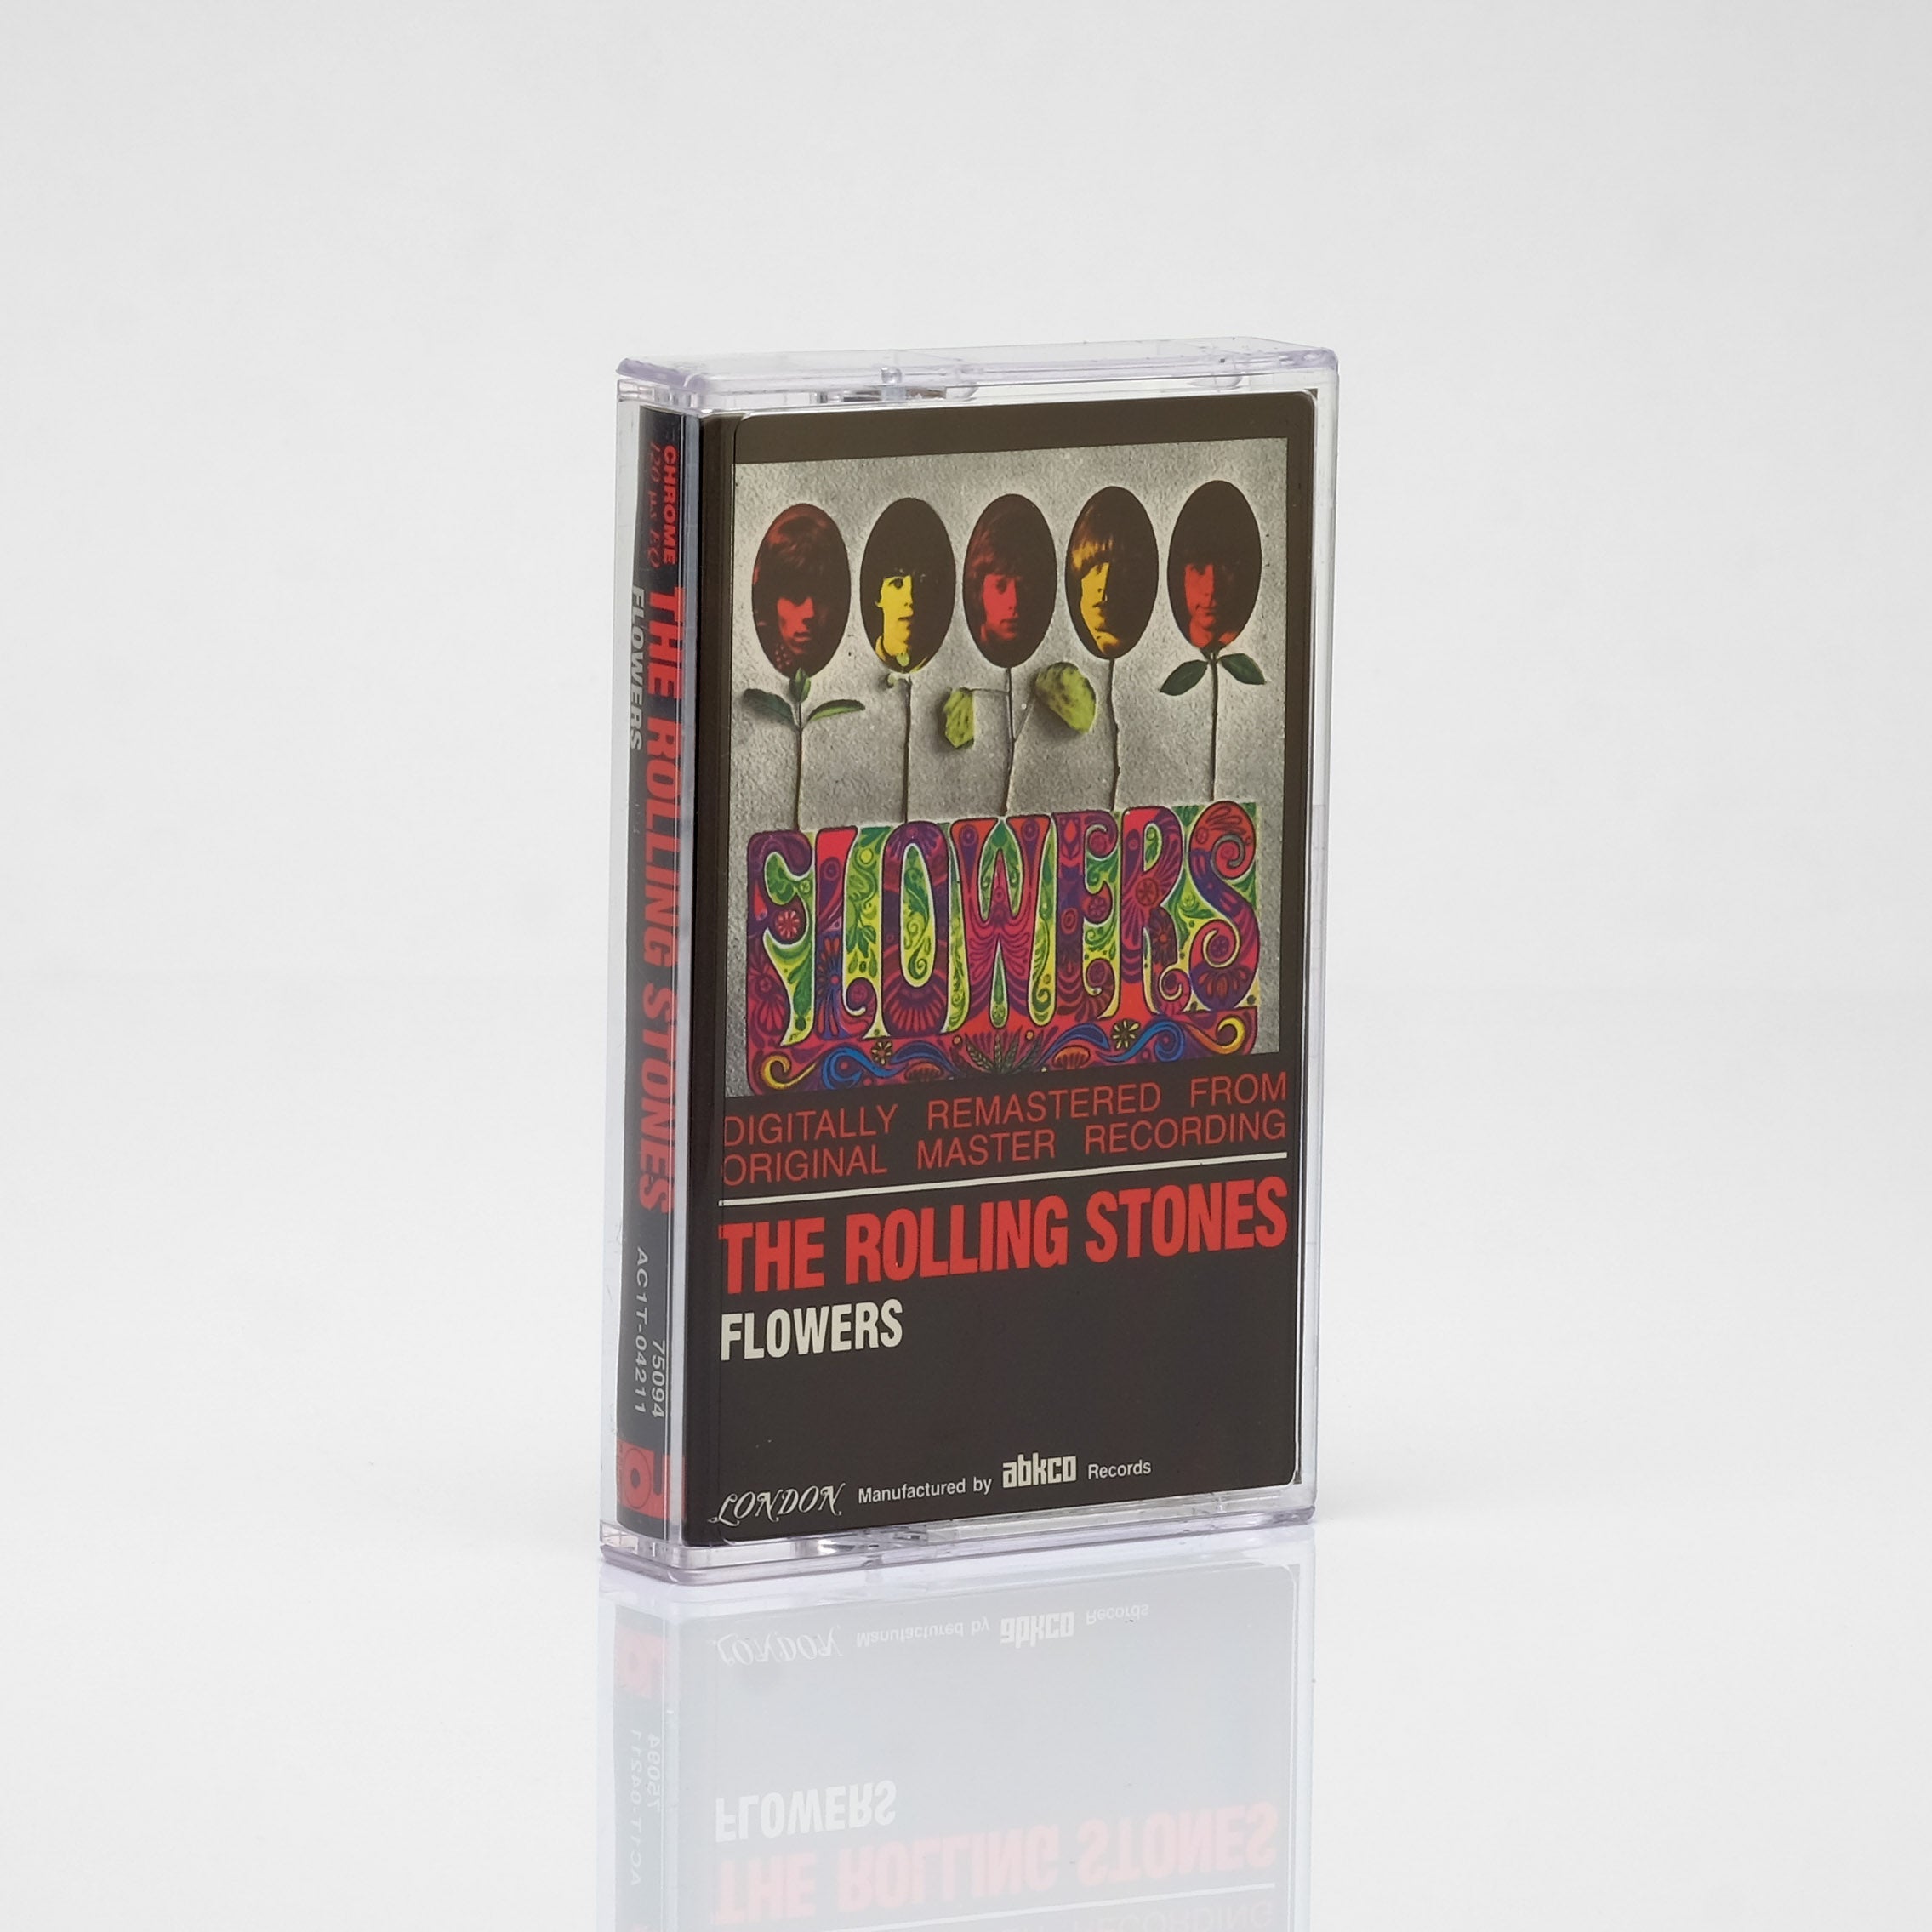 The Rolling Stones - Flowers Cassette Tape